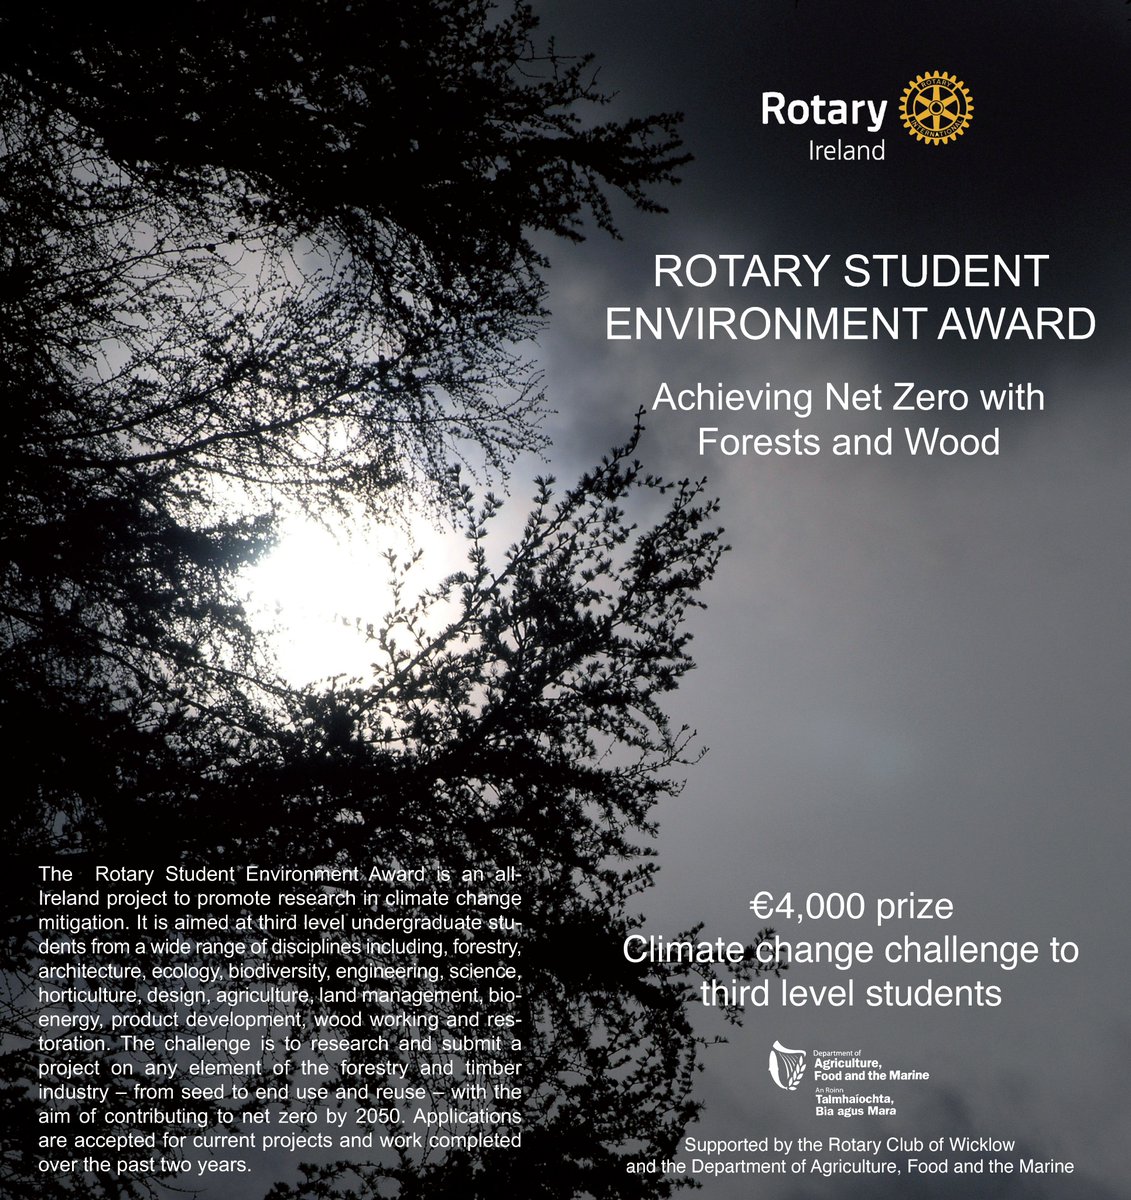 The Rotary Student Environment Award is an all-Ireland project to promote research in #climatechange mitigation. Open to third level students with a prize up to €4,000 Closing date: 3rd July 2024 Link: wood.ie/wp-content/upl… #woodawards